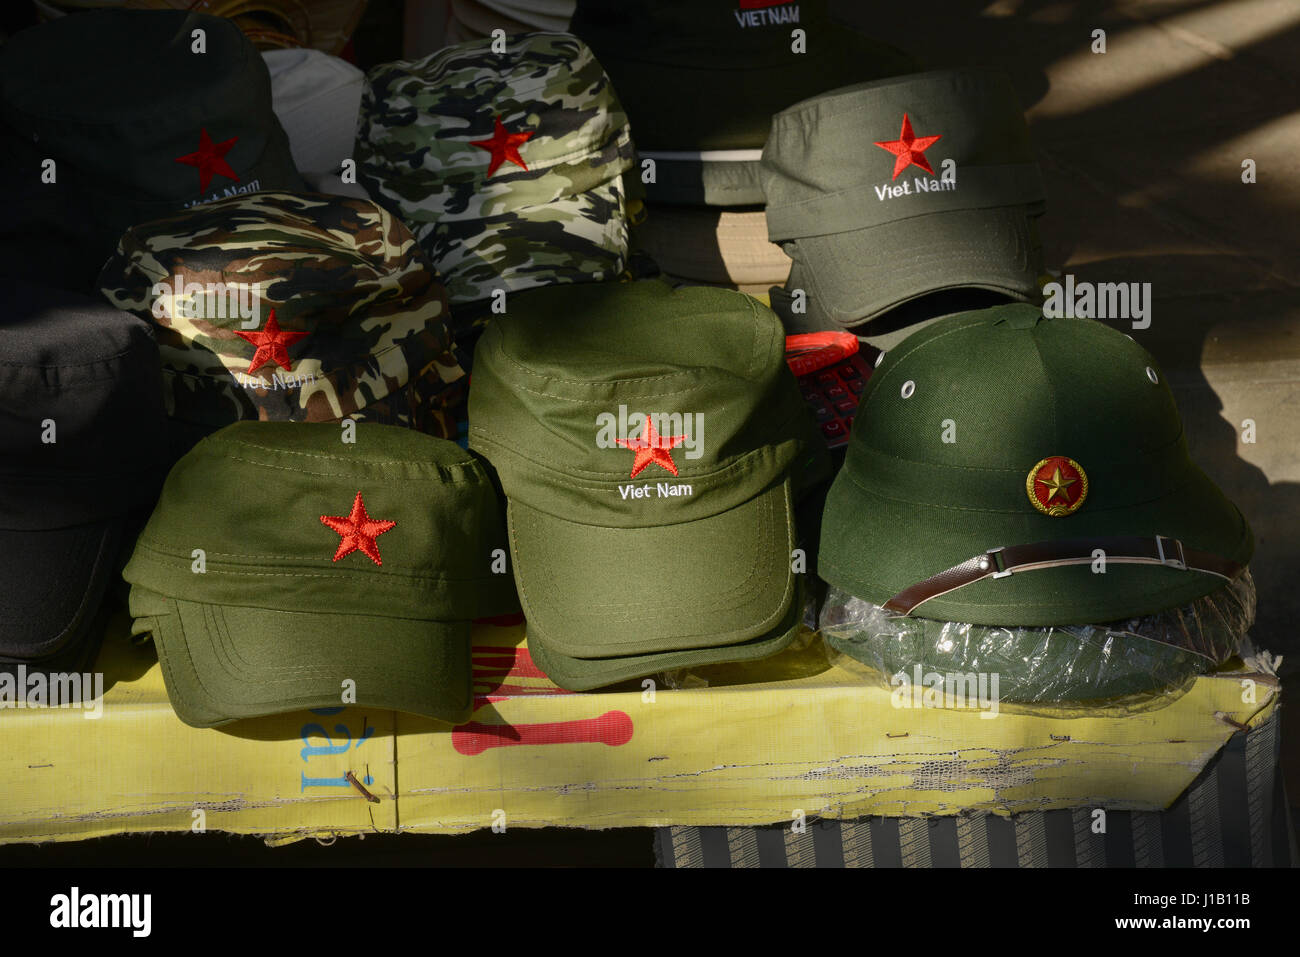 Souvenir Viet Cong caps for sale to tourists on a market stall in the town of Hoi An, in Quang Nam Province, Vietnam. Stock Photo